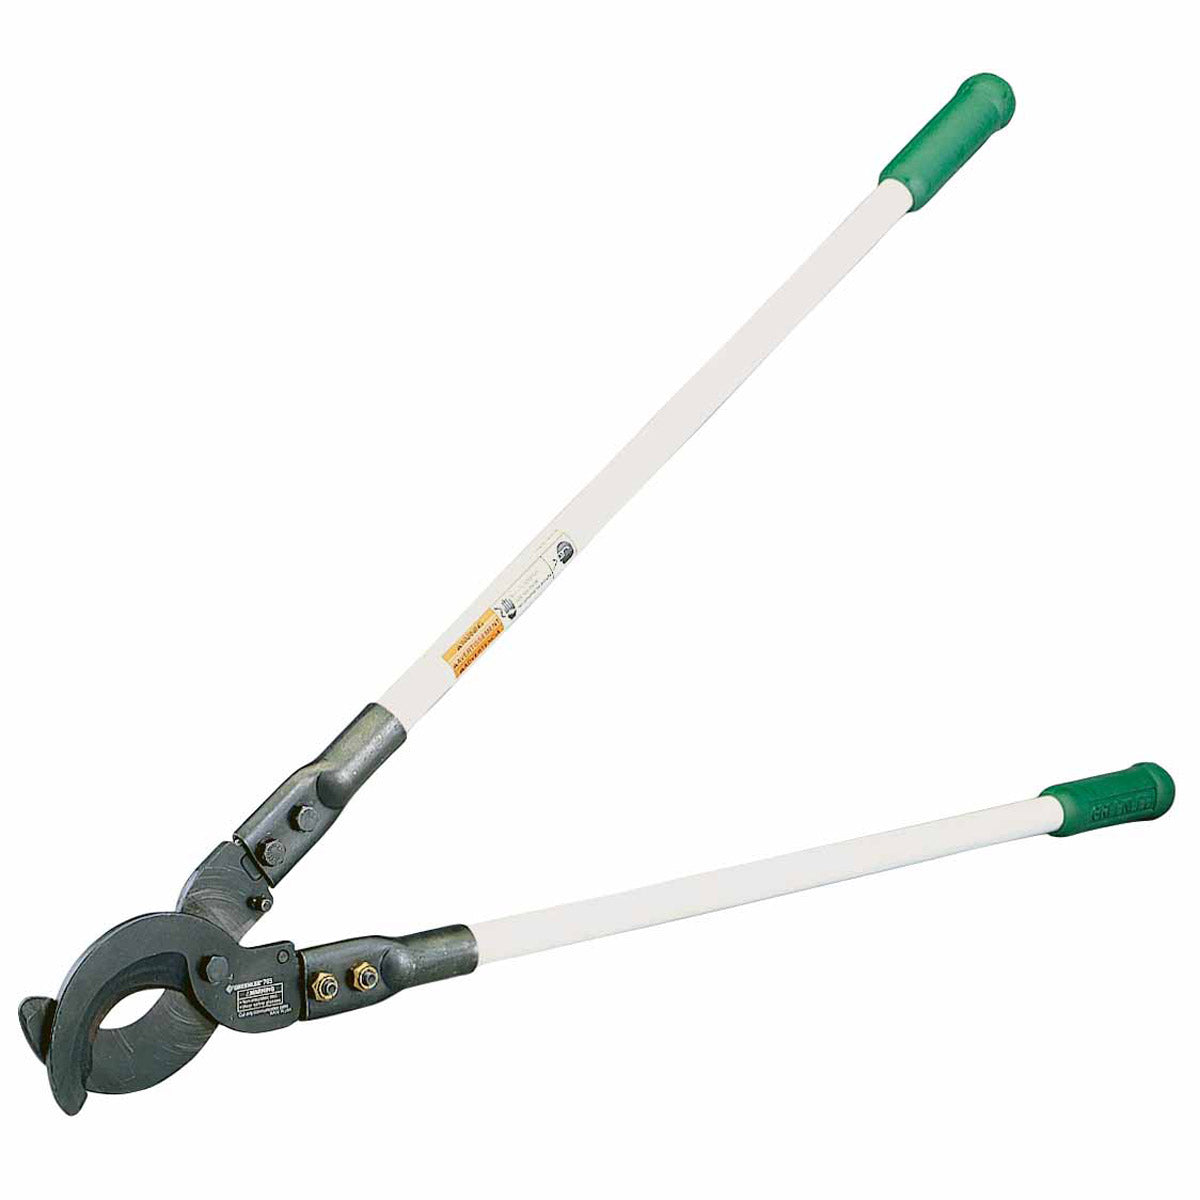 Greenlee 765 Heavy-Duty (up to 2-1/4" 57mm) Communications Cable Cutter